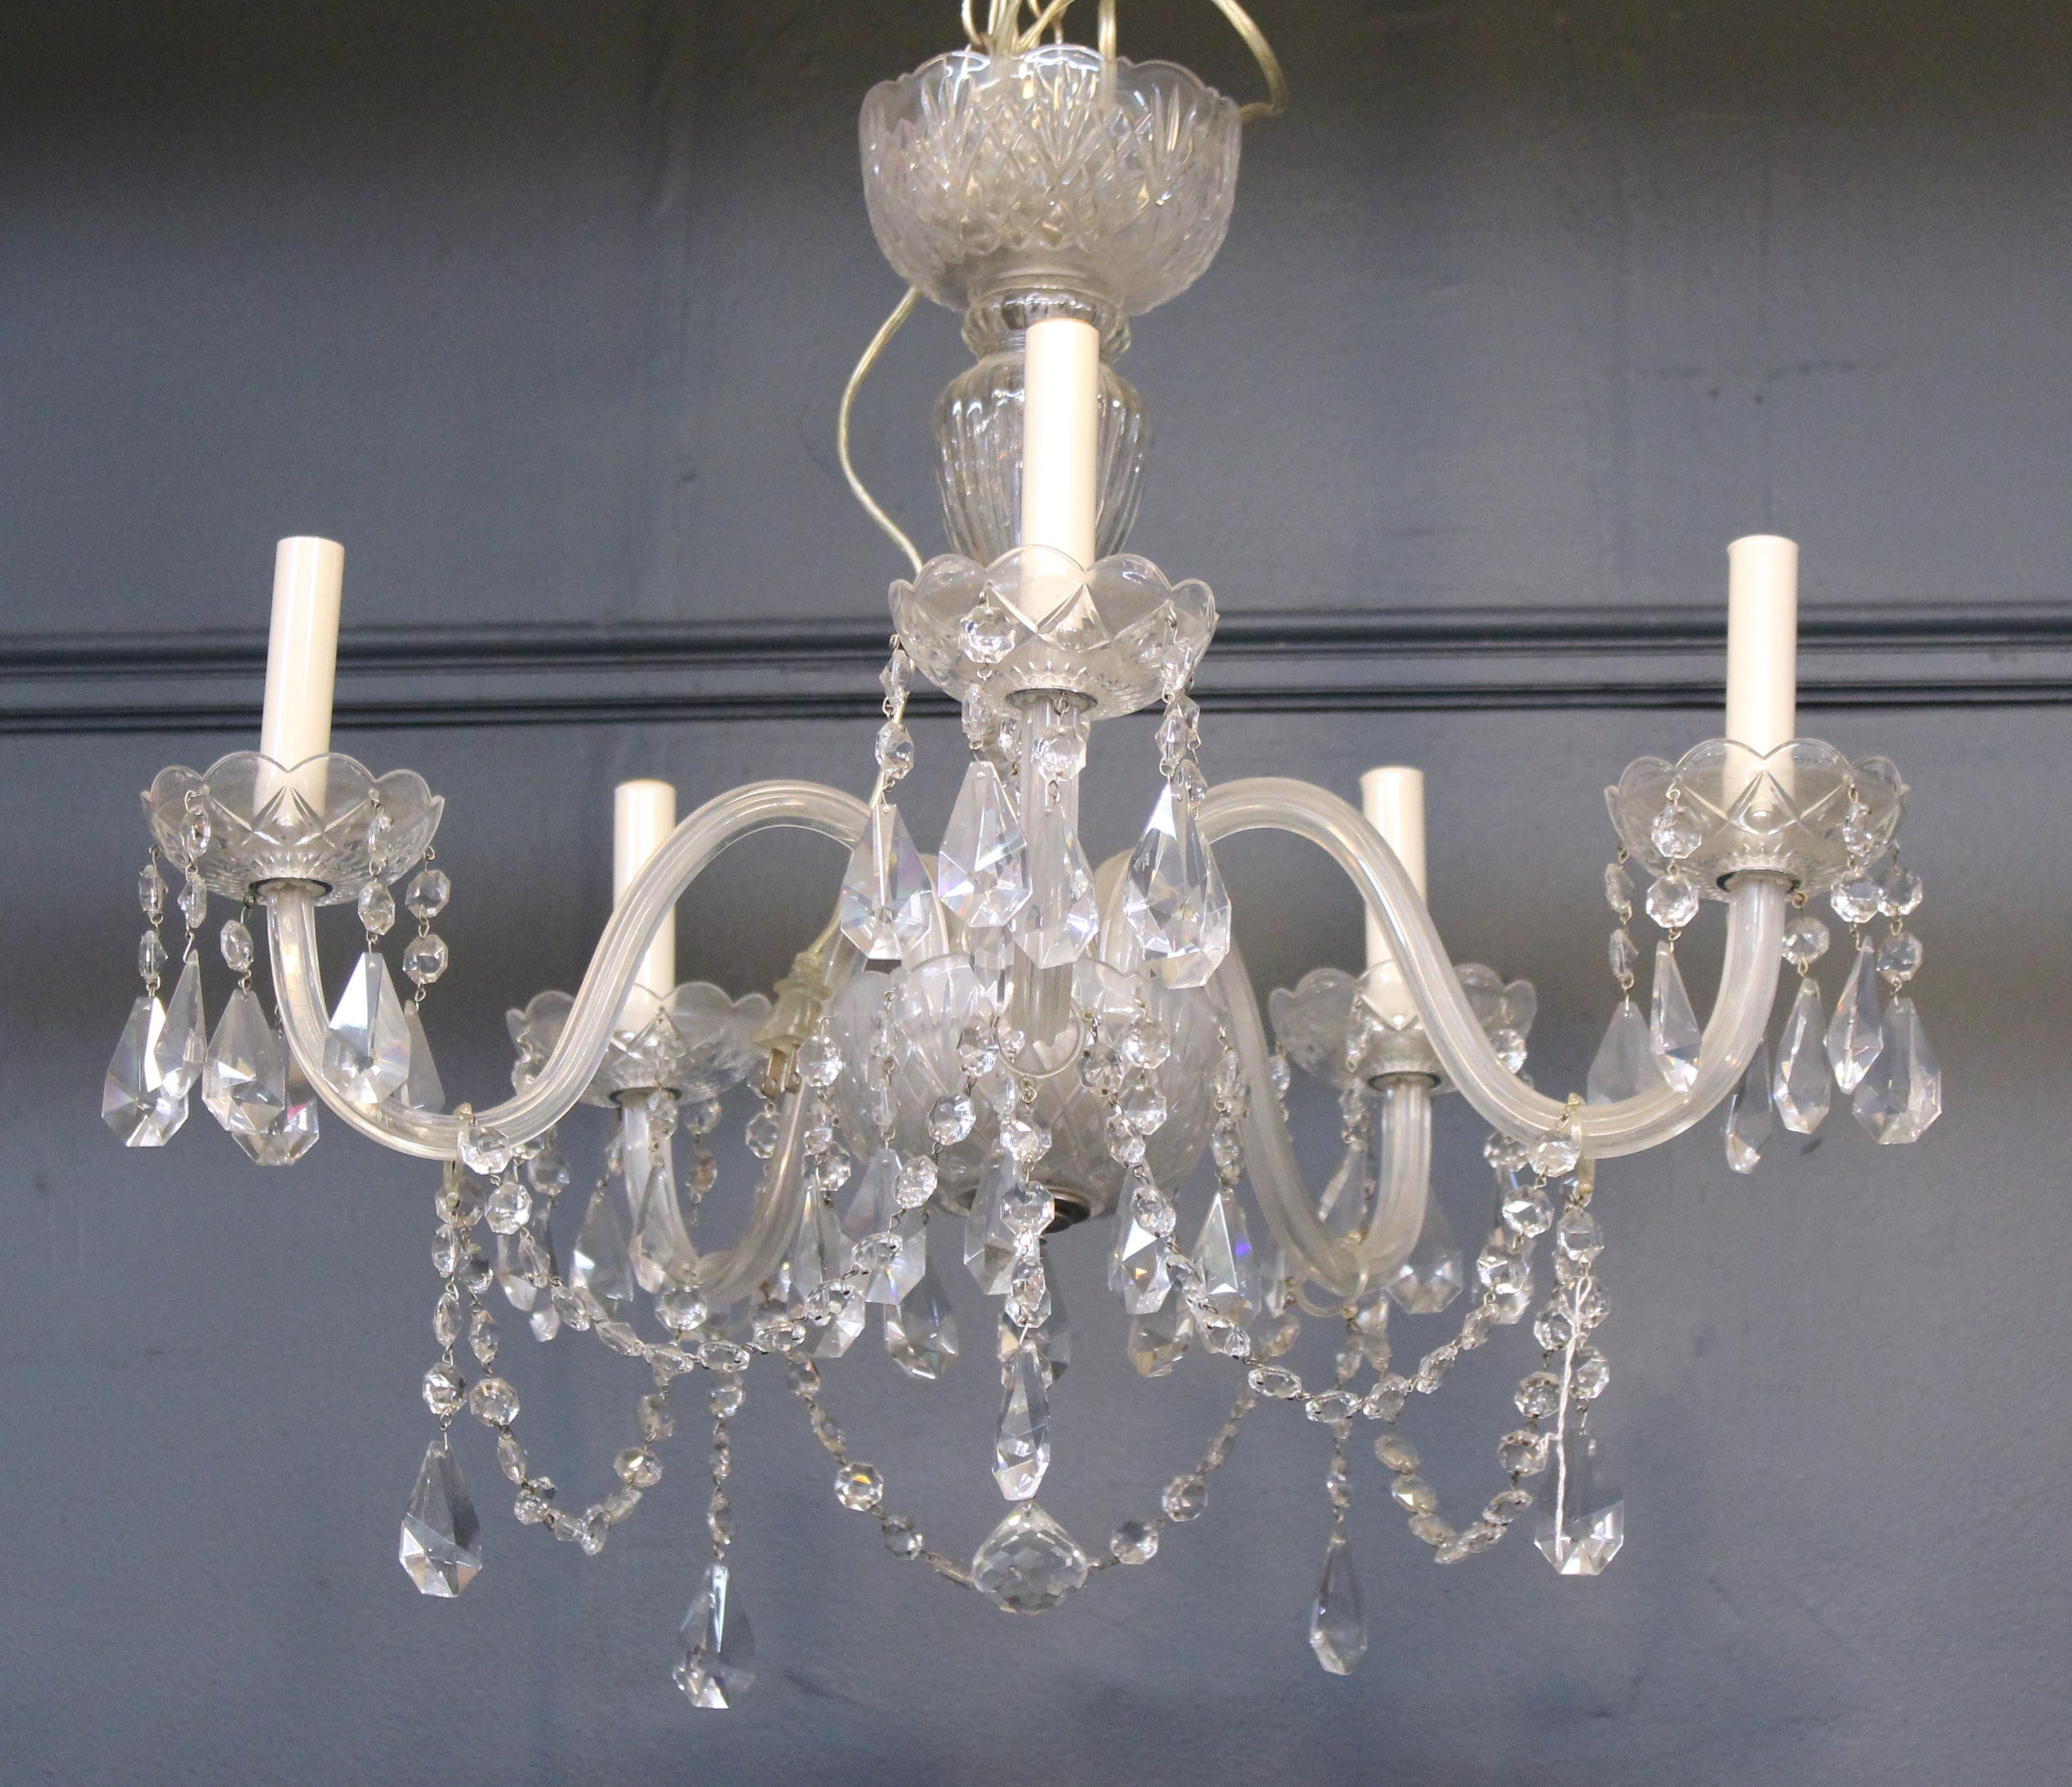 Neoclassical Revival Neoclassical Style Five-Arm Crystal Chandelier